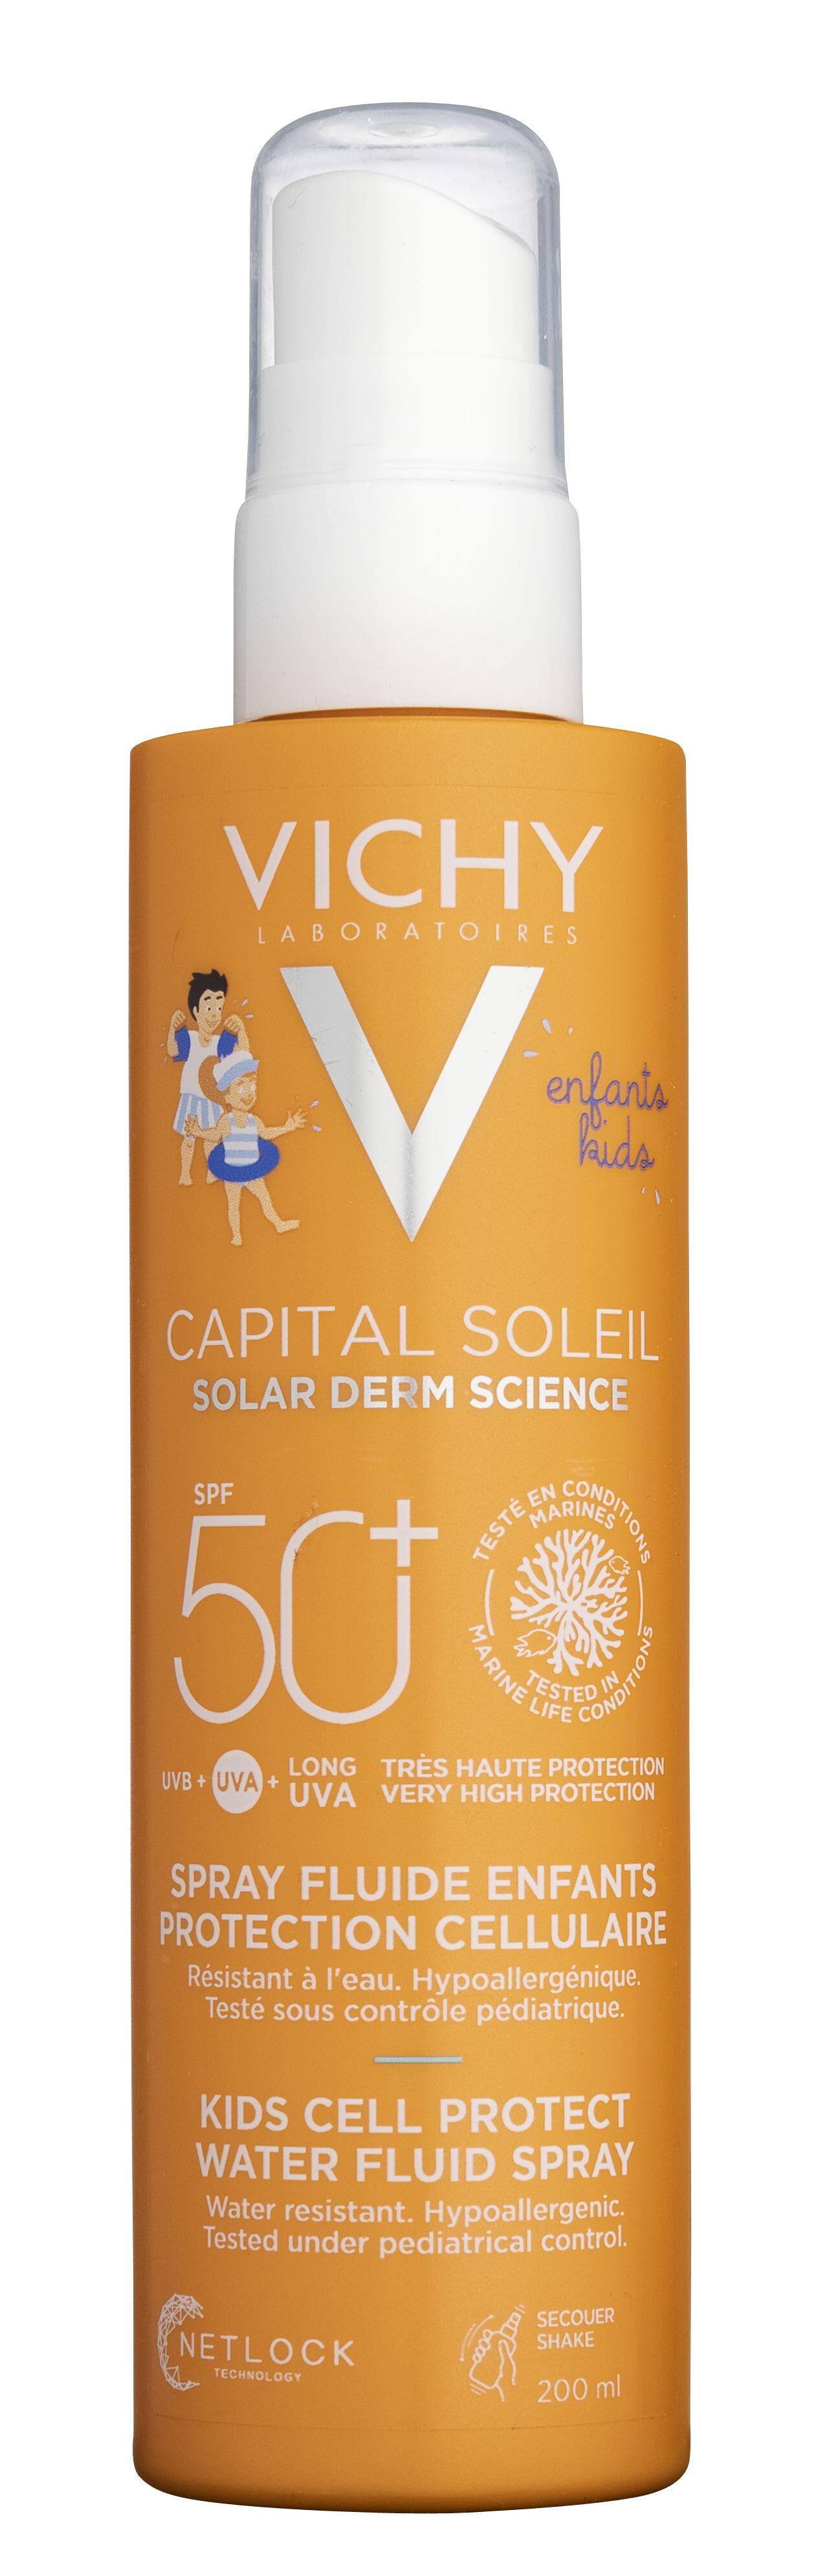 Kids cell protect water fluid spray SPF 50+ Vichy